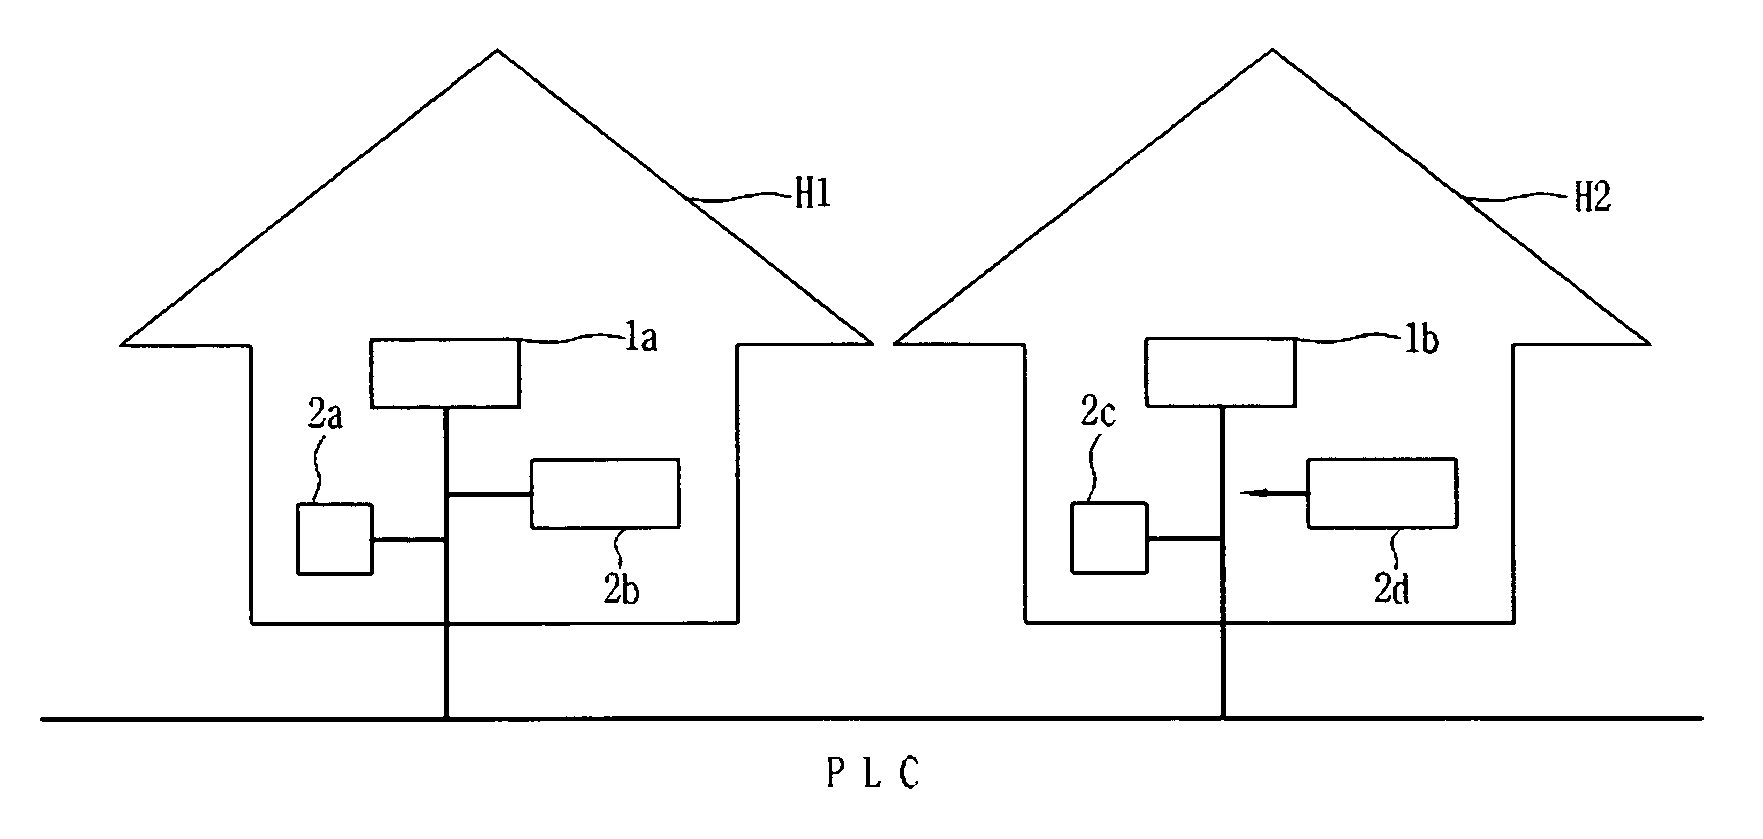 Home code setting method for home network system